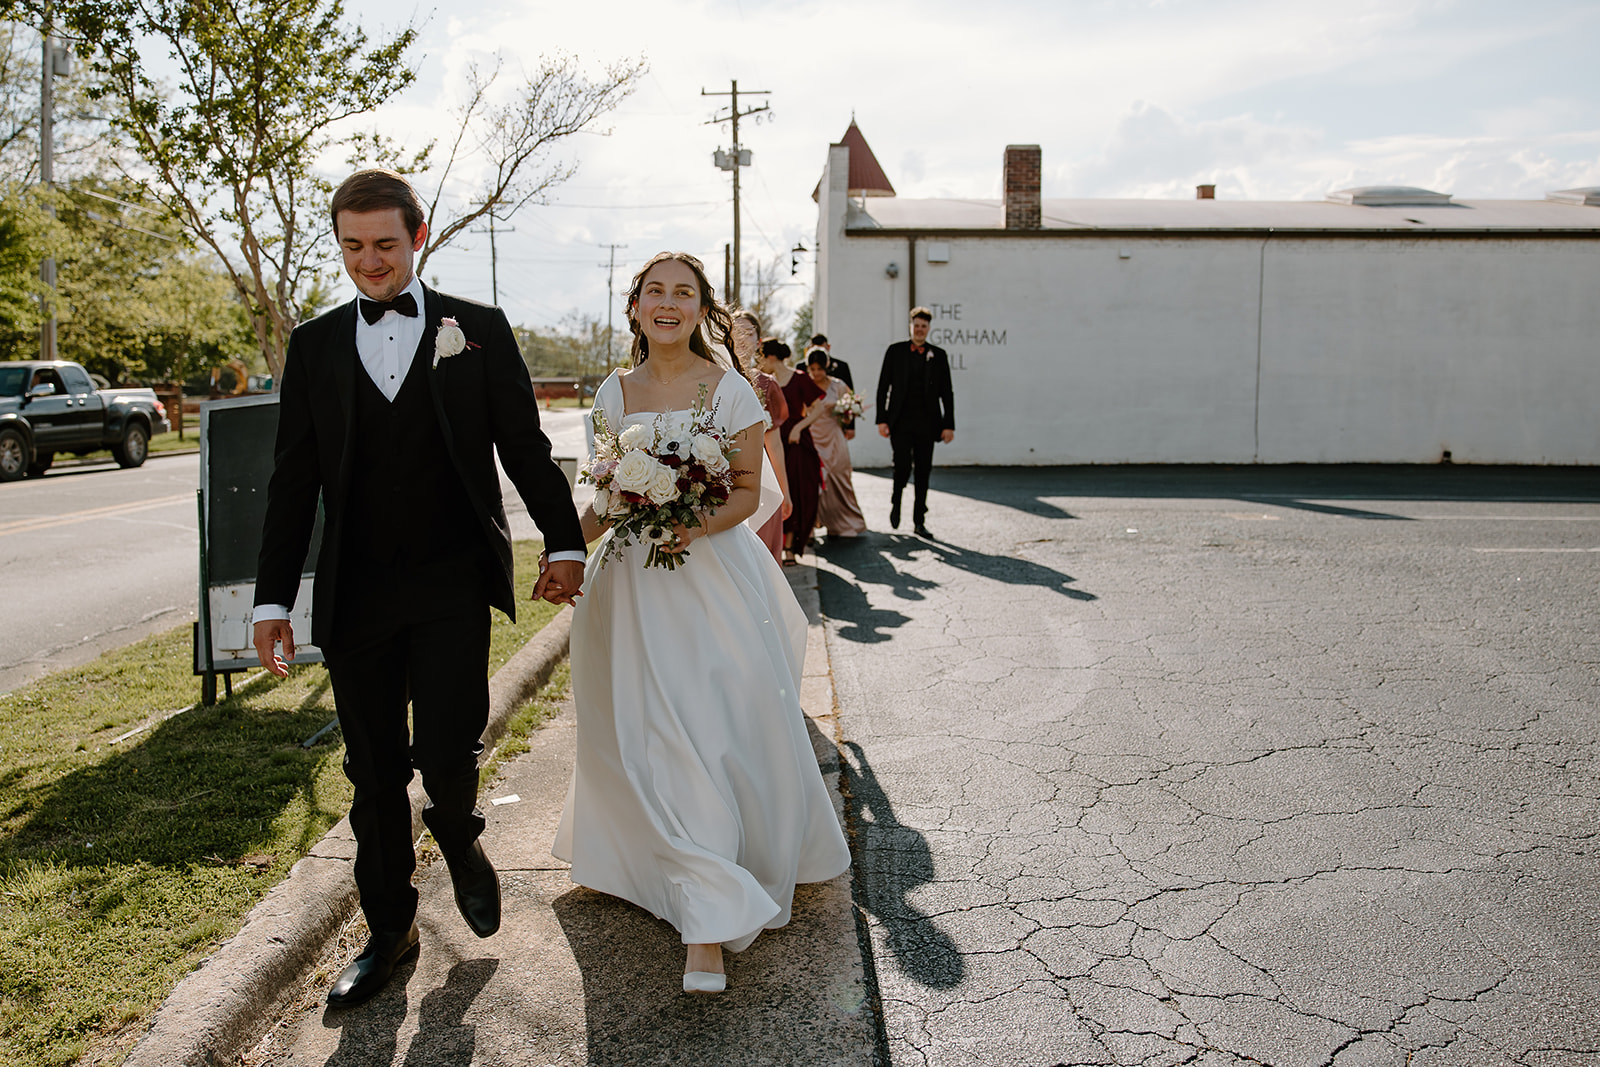 Downtown wedding party photos near The Graham Mill in North Carolina by Raleigh Wedding Photographers and Videographers